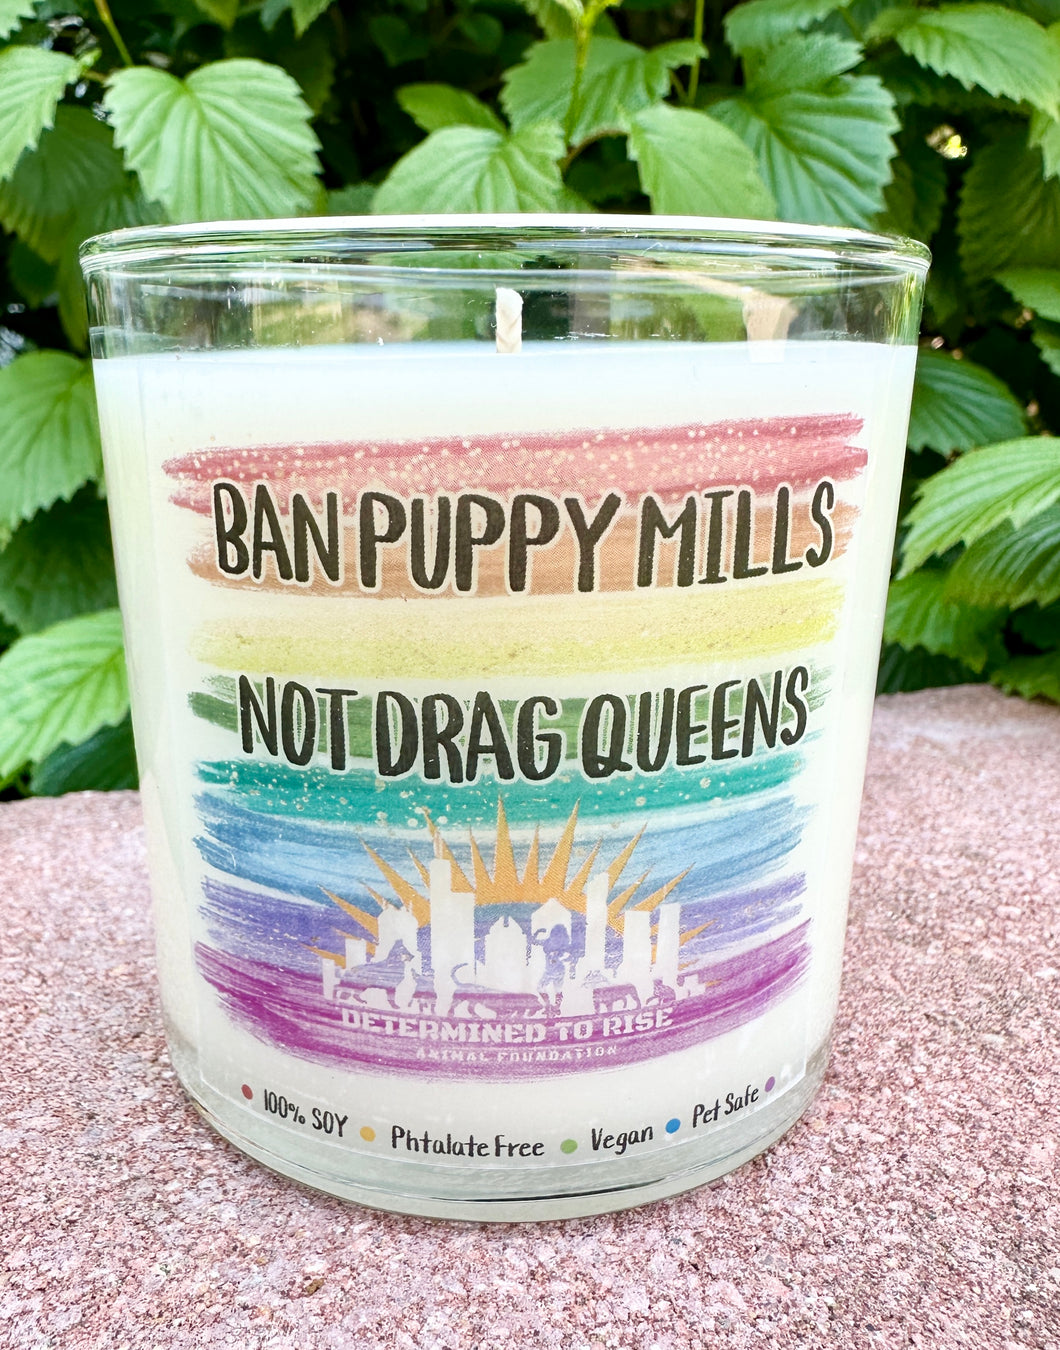 LIMITED TIME Pride Special 9oz Soy Candle - 